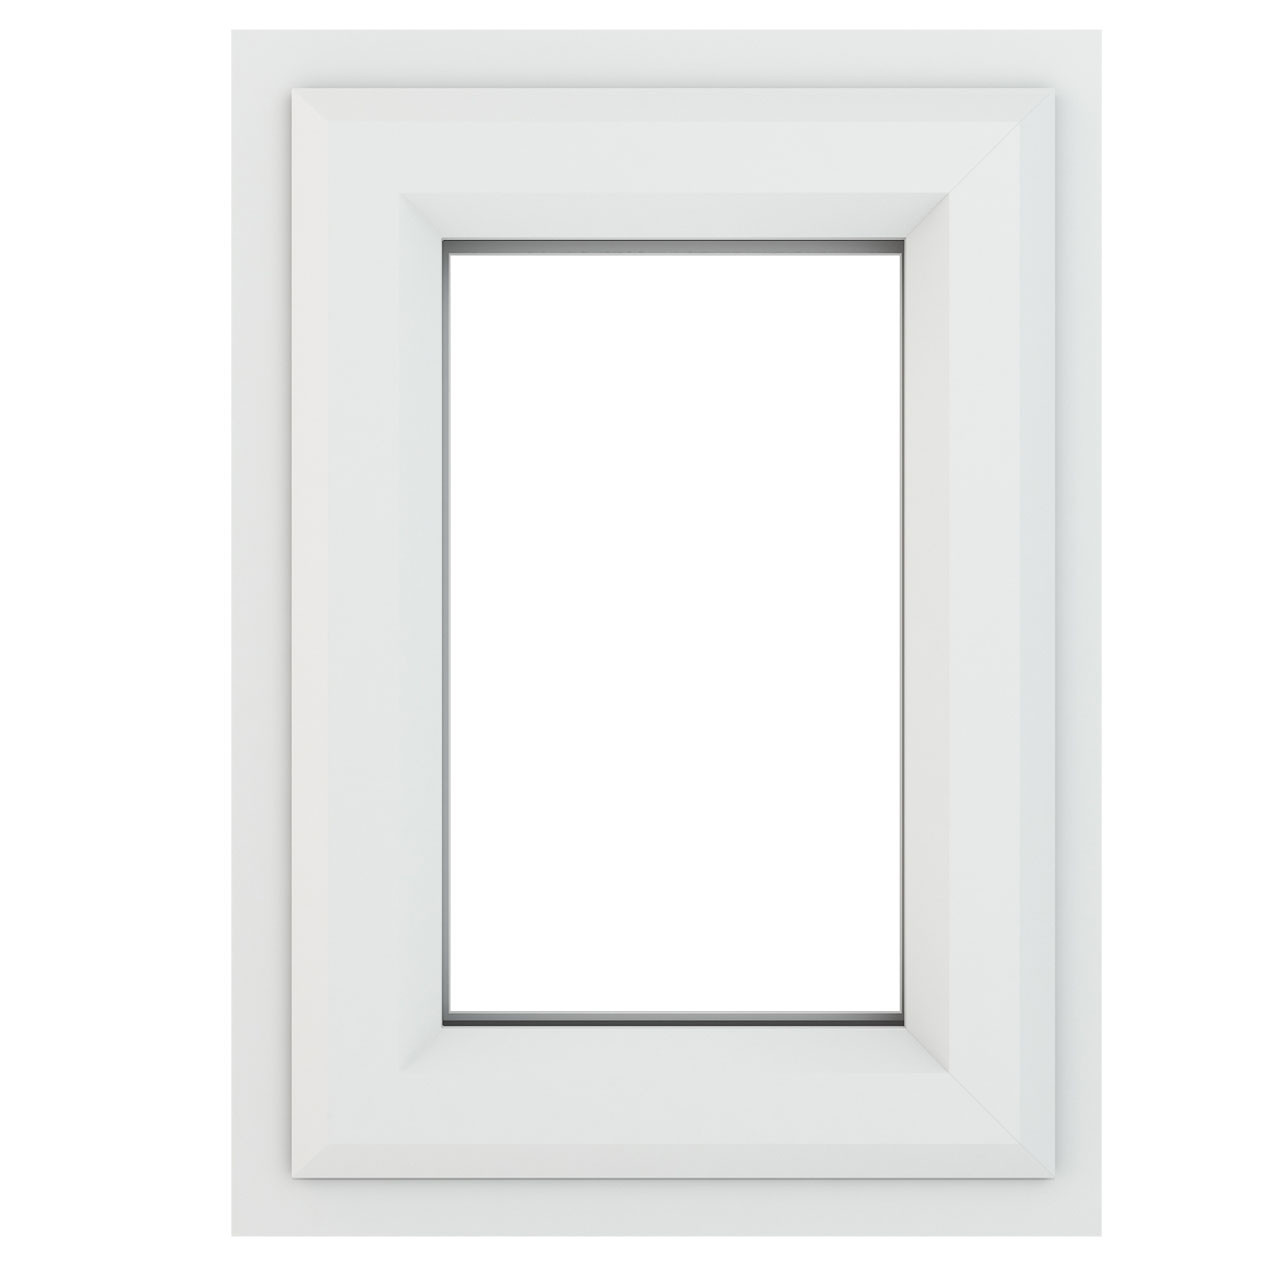 Photograph of Crystal White uPVC Top Opening Window 820mm x 820mm